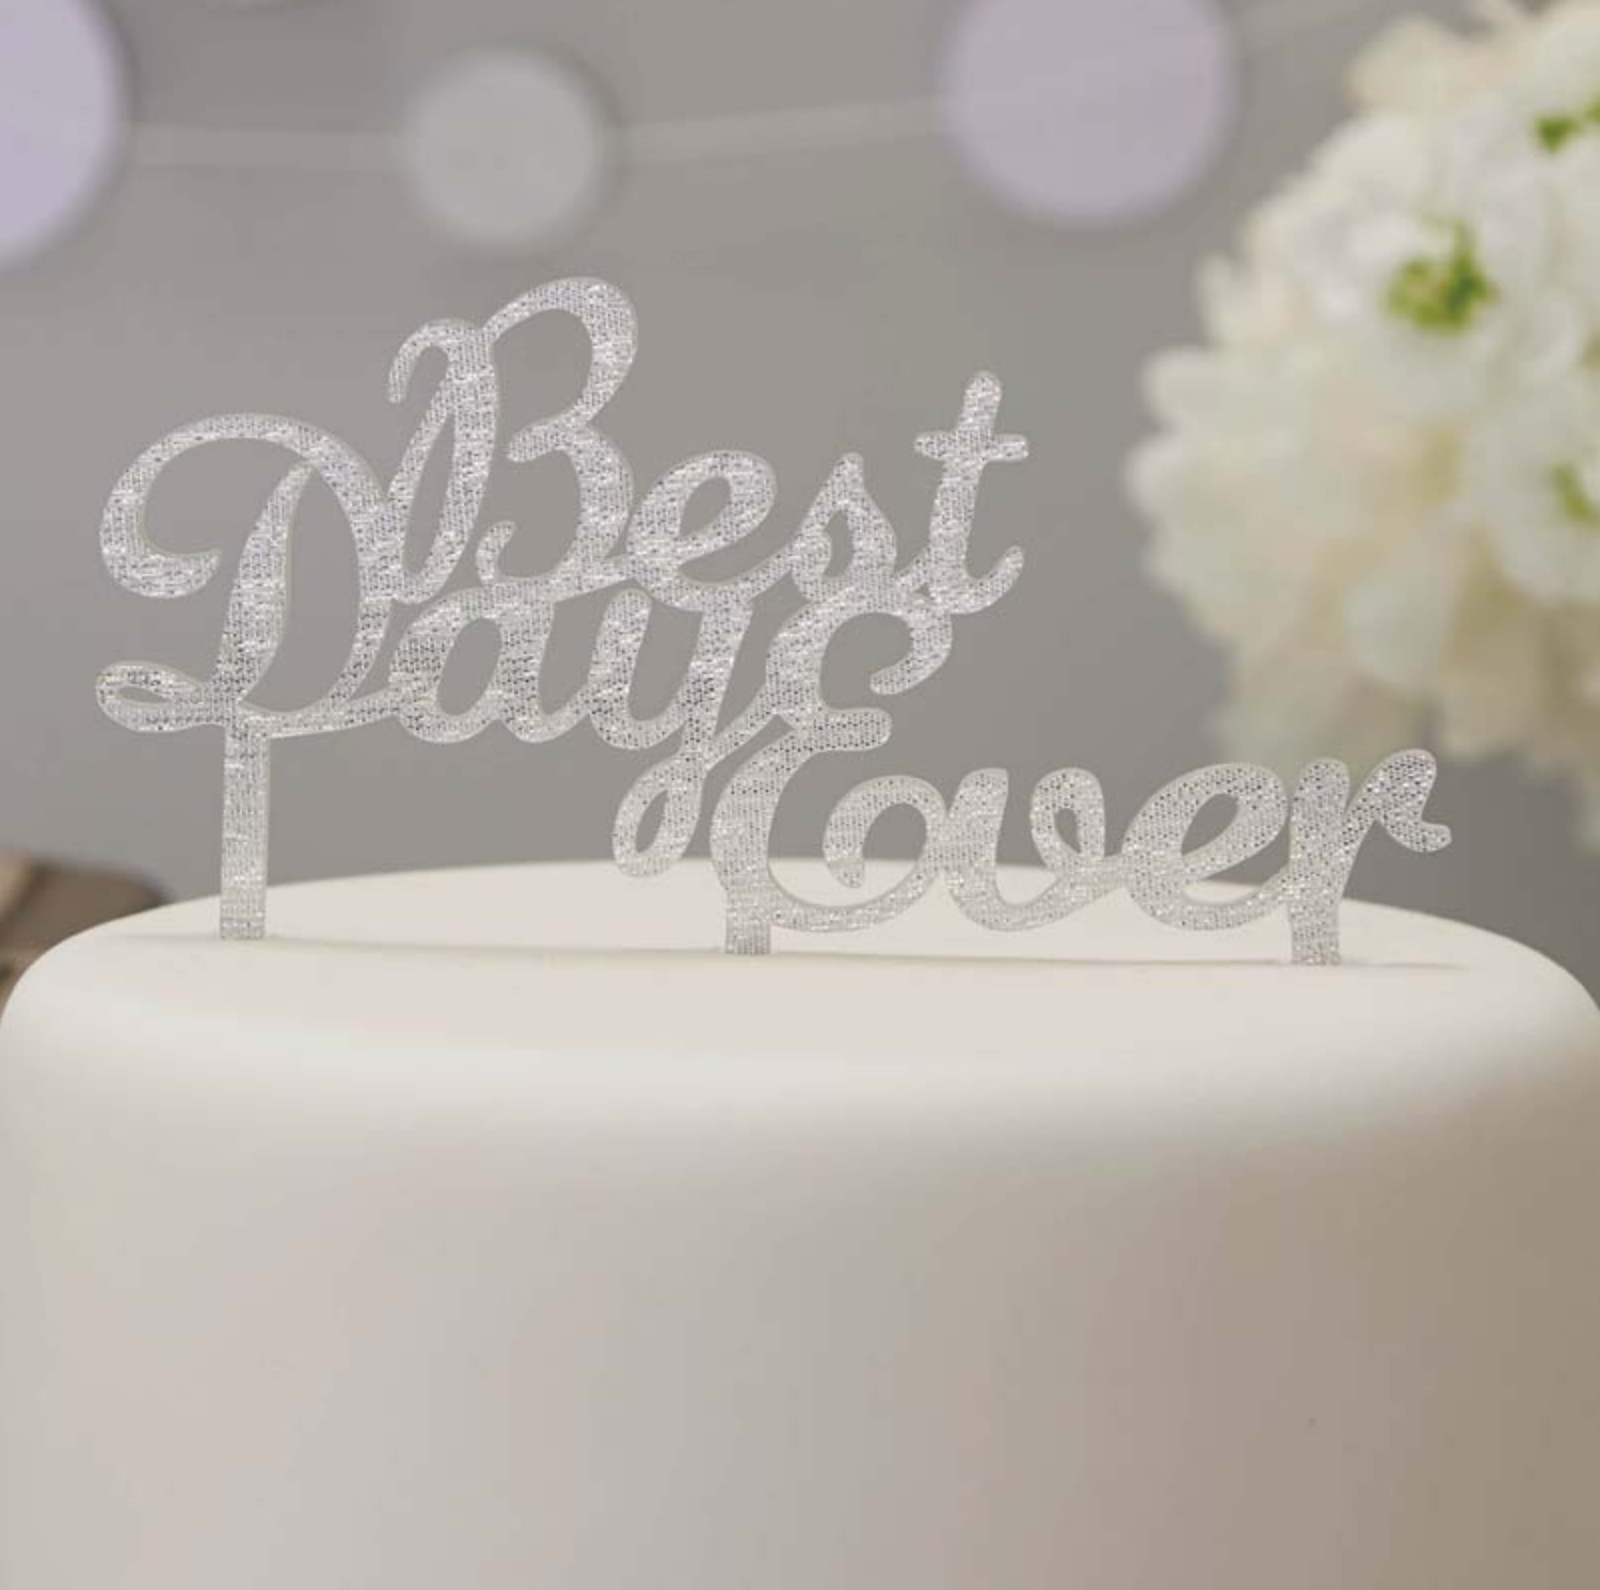 "Best Day Ever" Cake Topper